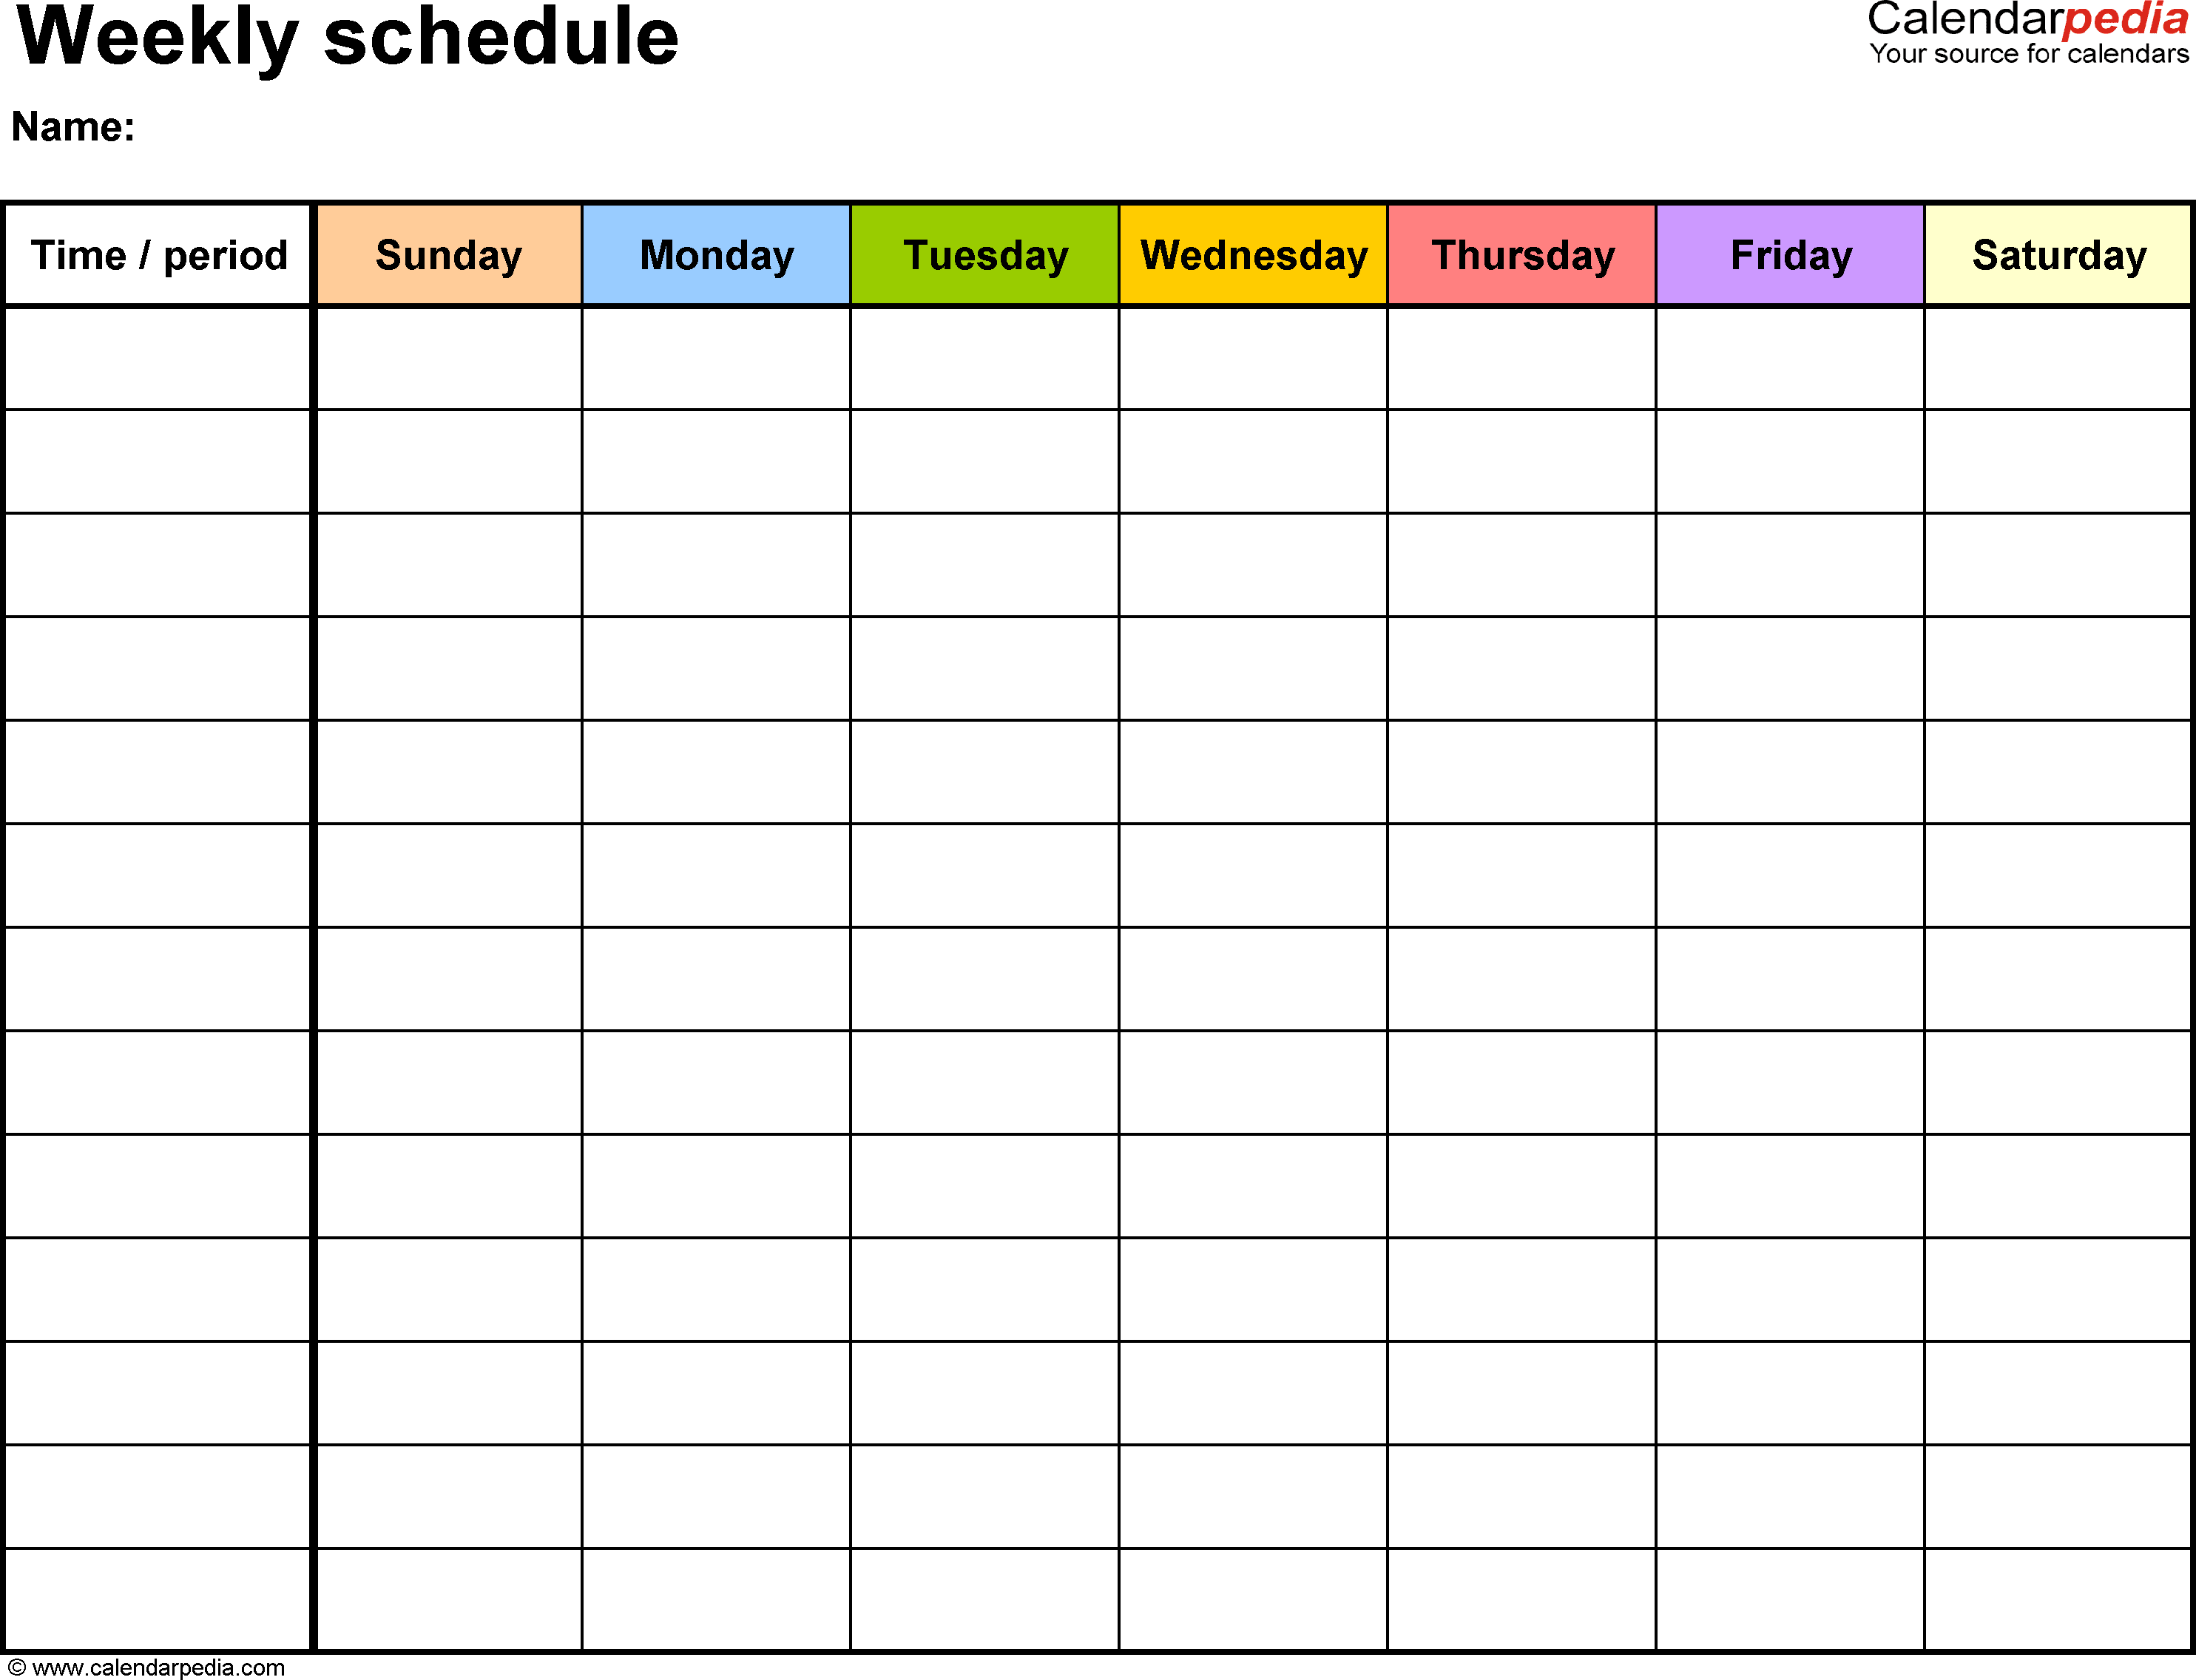 Letter Of Weekly Schedule Template Excel To Weekly Schedule Template Excel Form